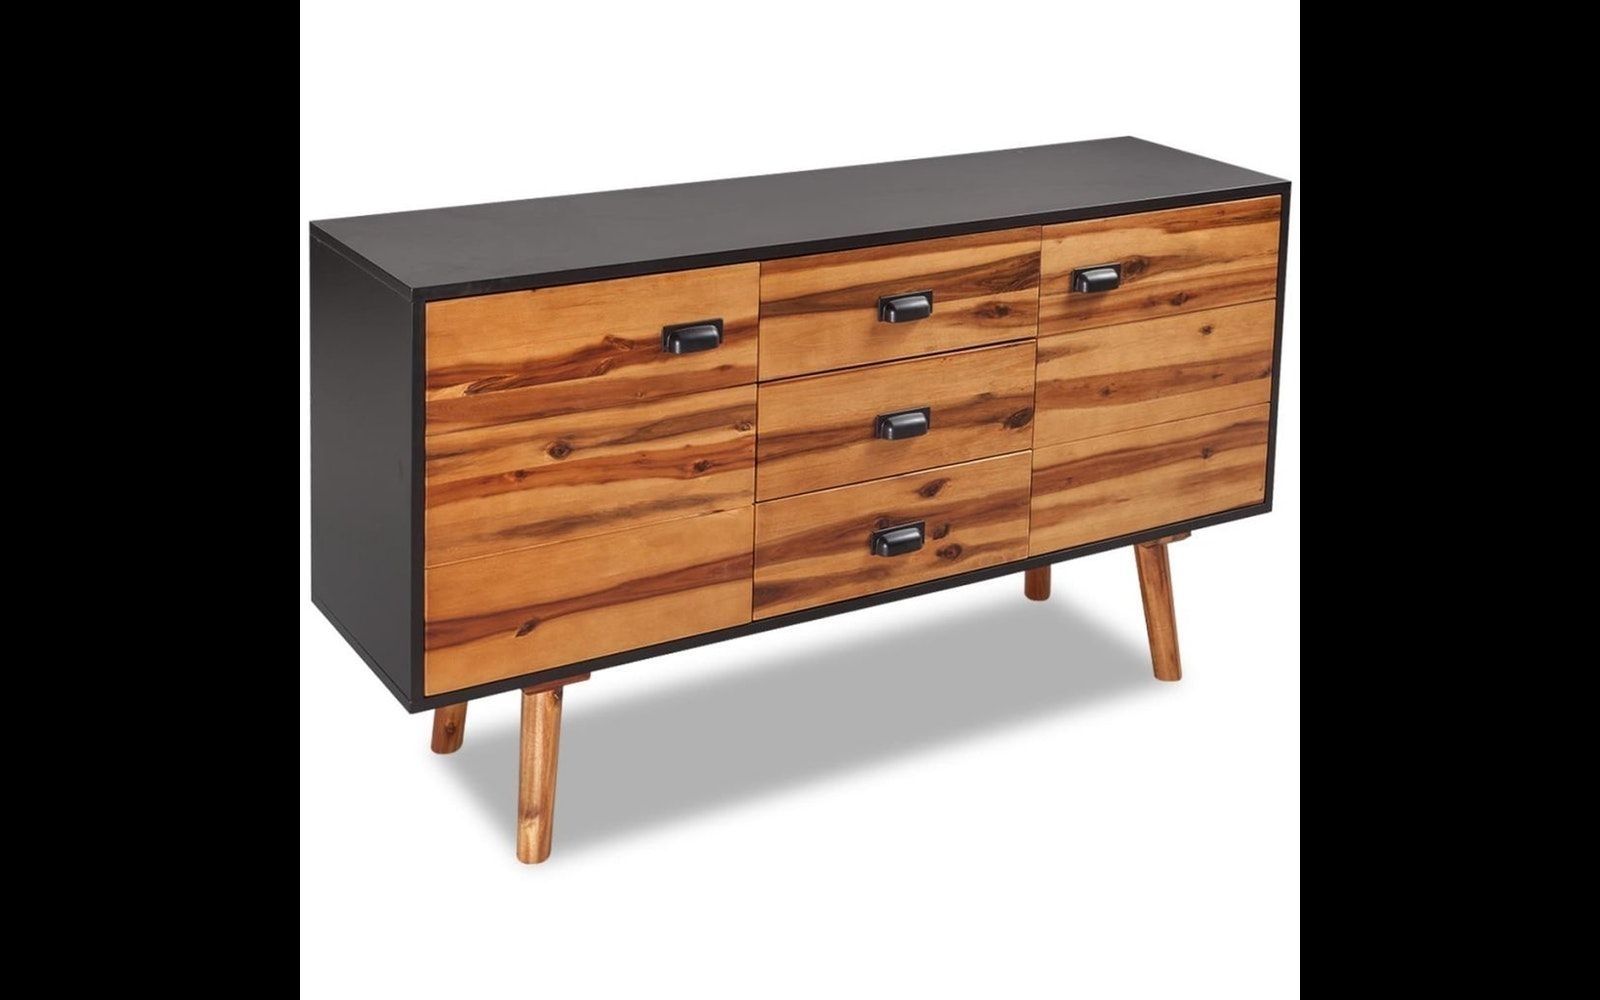 Solid Acacia Wood Sideboard | Buffet, Hutches & Sideboards For Sale Inside Most Current Jaxon Sideboards (View 10 of 20)